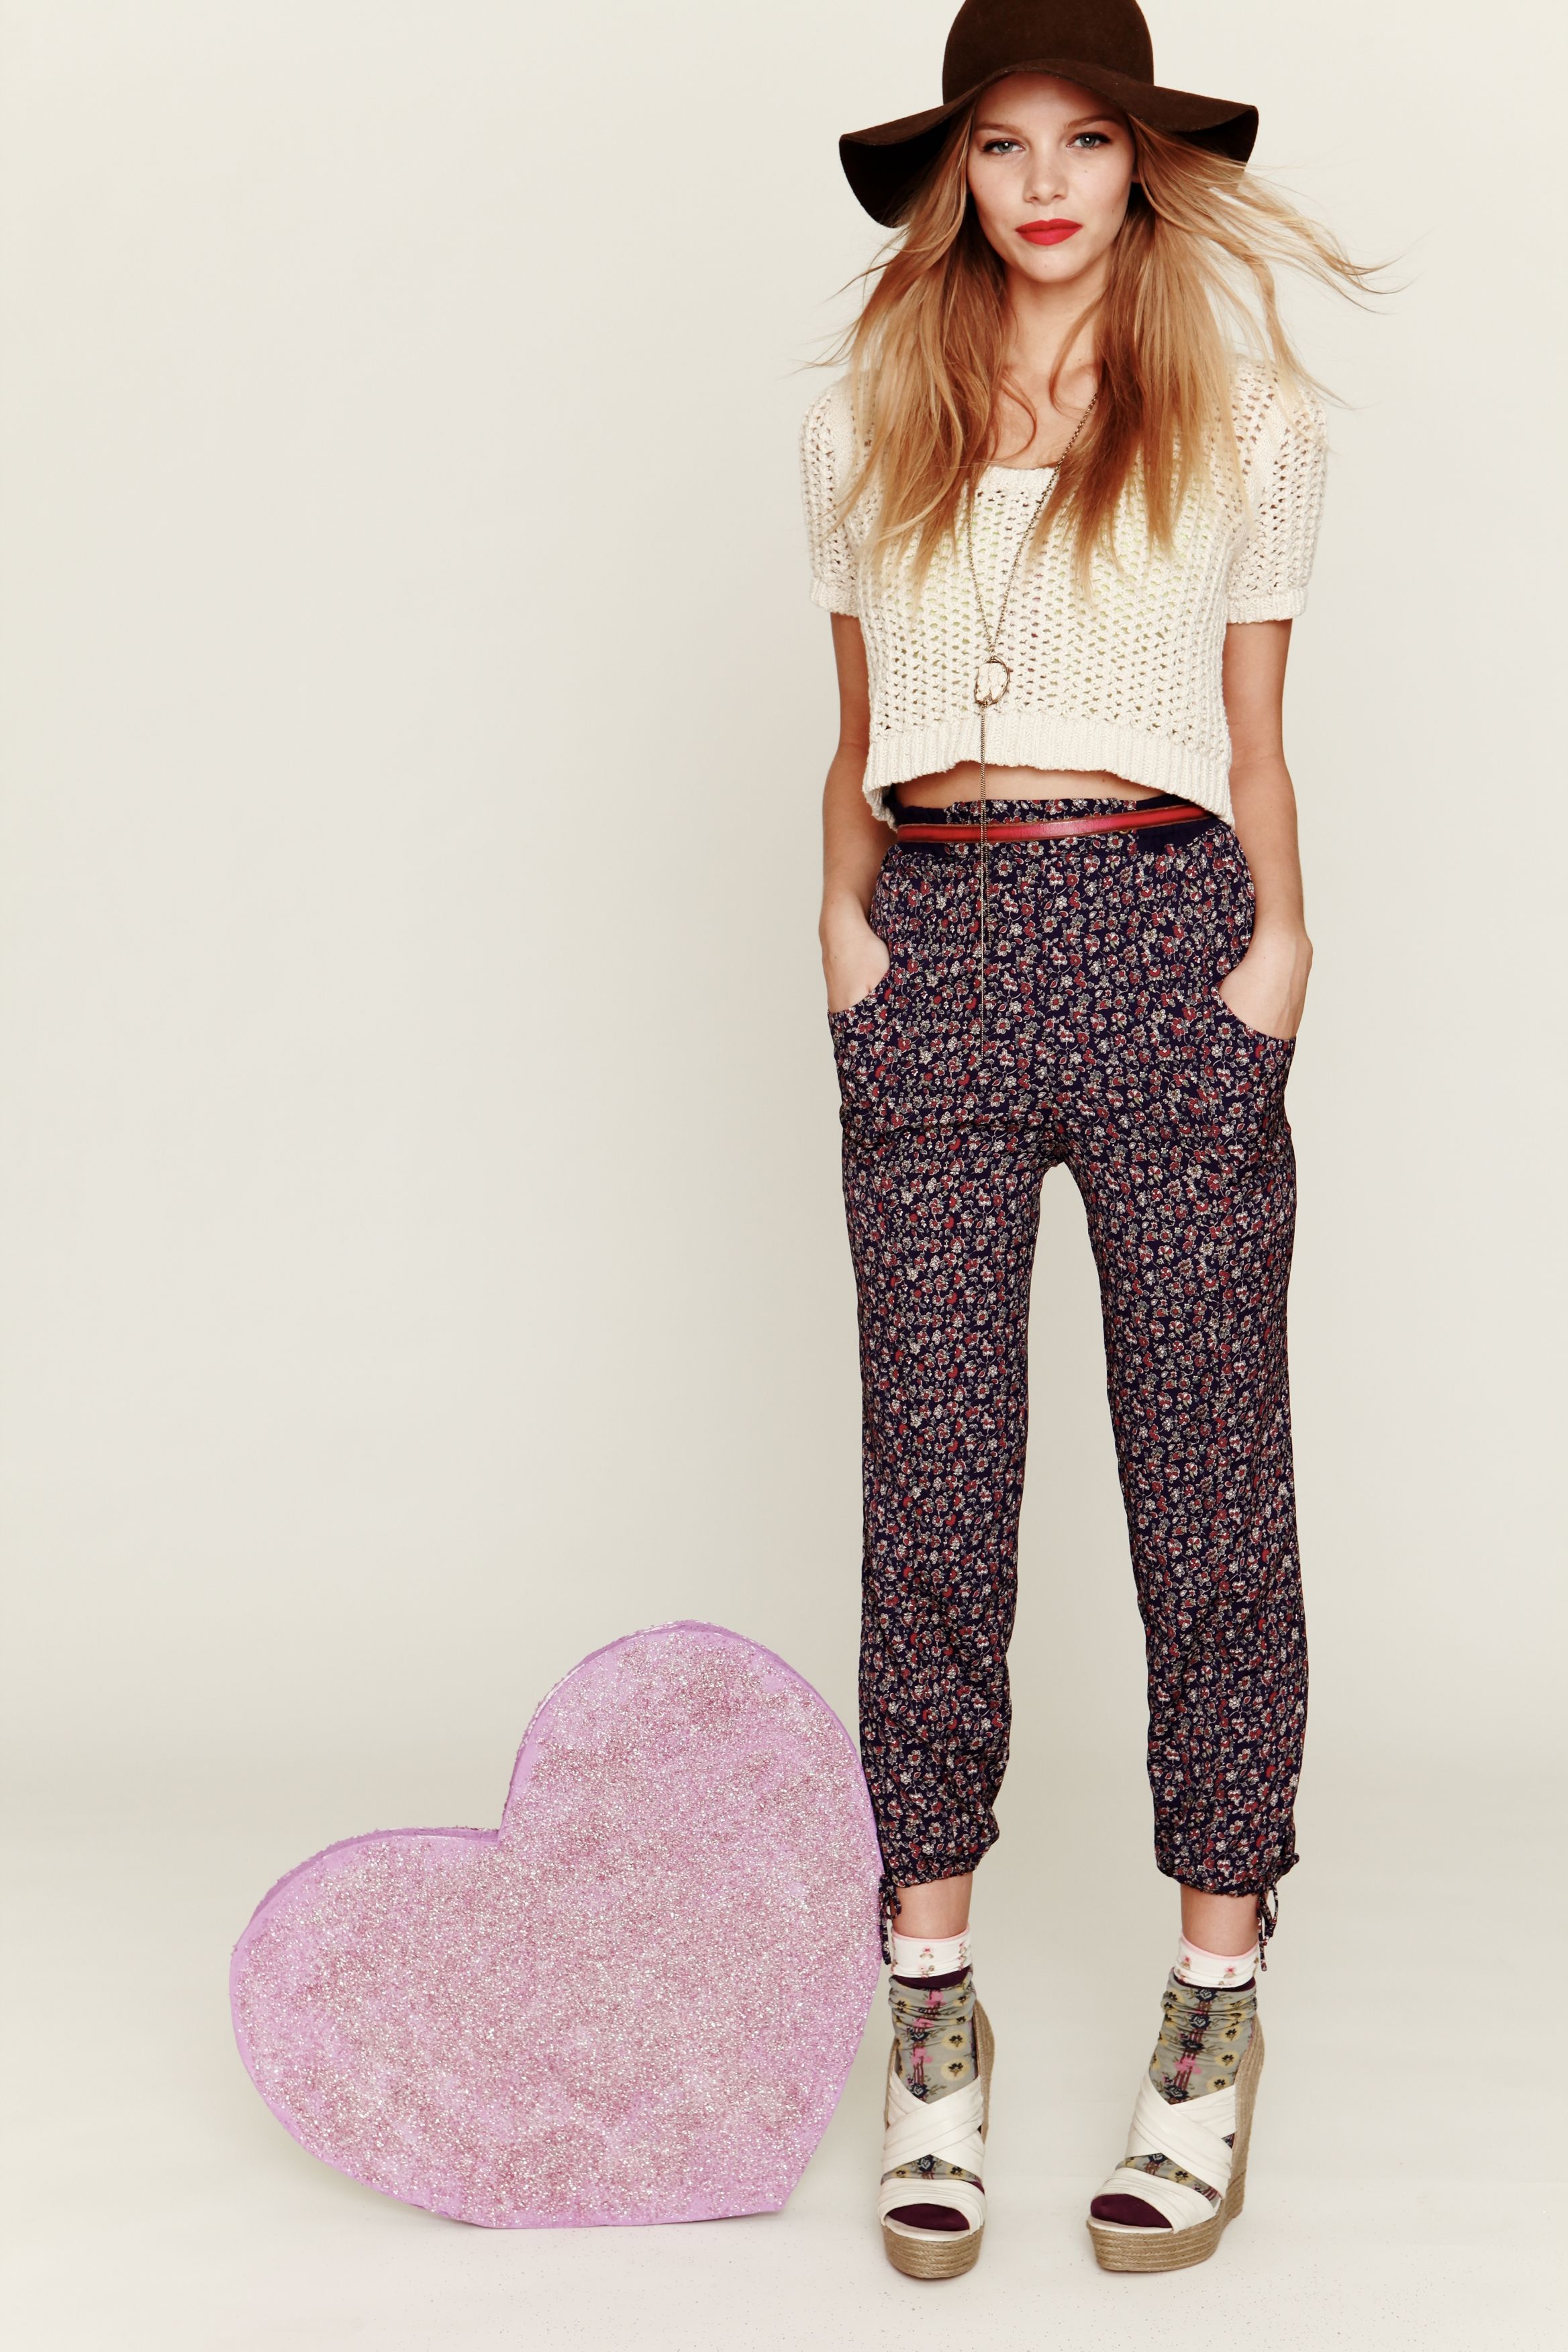 Free People February 2011 Look Book